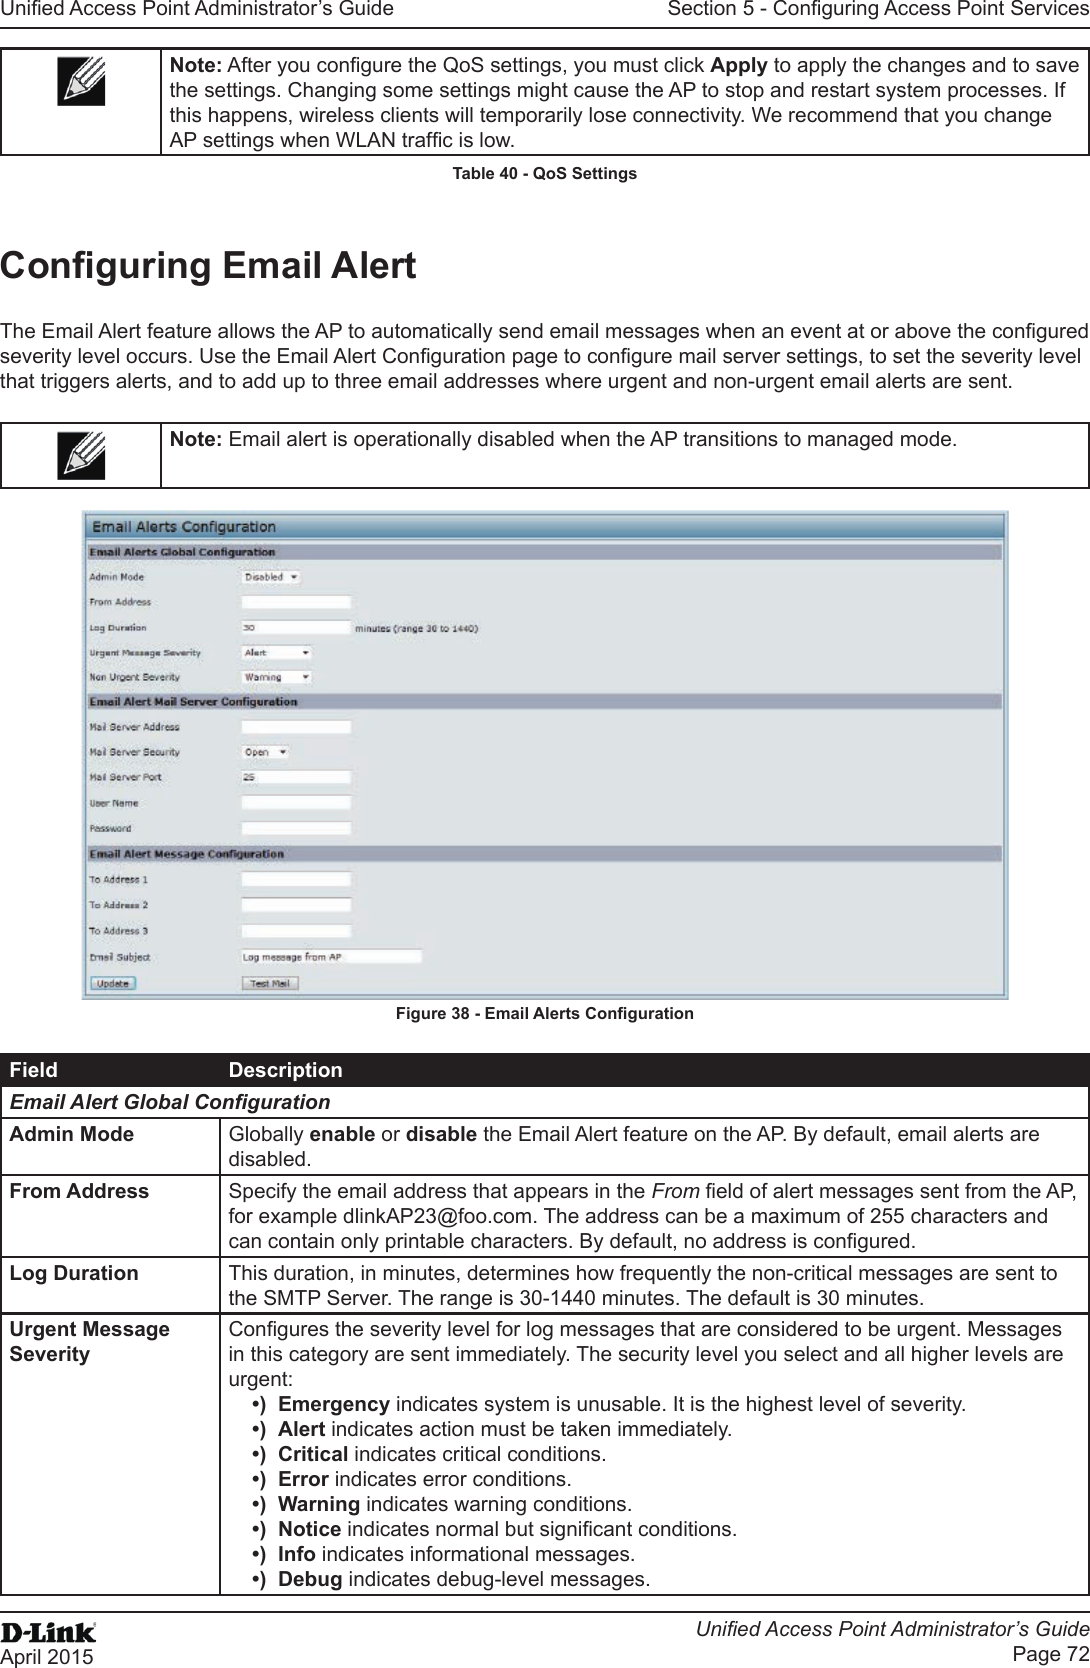 Unied Access Point Administrator’s GuideUnied Access Point Administrator’s GuidePage 72April 2015Section 5 - Conguring Access Point ServicesNote: After you congure the QoS settings, you must click Apply to apply the changes and to save the settings. Changing some settings might cause the AP to stop and restart system processes. If this happens, wireless clients will temporarily lose connectivity. We recommend that you change AP settings when WLAN trafc is low. Table 40 - QoS SettingsConguring Email AlertThe Email Alert feature allows the AP to automatically send email messages when an event at or above the congured severity level occurs. Use the Email Alert Conguration page to congure mail server settings, to set the severity level that triggers alerts, and to add up to three email addresses where urgent and non-urgent email alerts are sent.Note: Email alert is operationally disabled when the AP transitions to managed mode.Figure 38 - Email Alerts CongurationField DescriptionEmail Alert Global CongurationAdmin Mode Globally enable or disable the Email Alert feature on the AP. By default, email alerts are disabled.From Address Specify the email address that appears in the From eld of alert messages sent from the AP, for example dlinkAP23@foo.com. The address can be a maximum of 255 characters and can contain only printable characters. By default, no address is congured.Log Duration This duration, in minutes, determines how frequently the non-critical messages are sent to the SMTP Server. The range is 30-1440 minutes. The default is 30 minutes.Urgent Message SeverityCongures the severity level for log messages that are considered to be urgent. Messages in this category are sent immediately. The security level you select and all higher levels are urgent:•)  Emergency indicates system is unusable. It is the highest level of severity.•)  Alert indicates action must be taken immediately.•)  Critical indicates critical conditions.•)  Error indicates error conditions.•)  Warning indicates warning conditions.•)  Notice indicates normal but signicant conditions.•)  Info indicates informational messages.•)  Debug indicates debug-level messages.